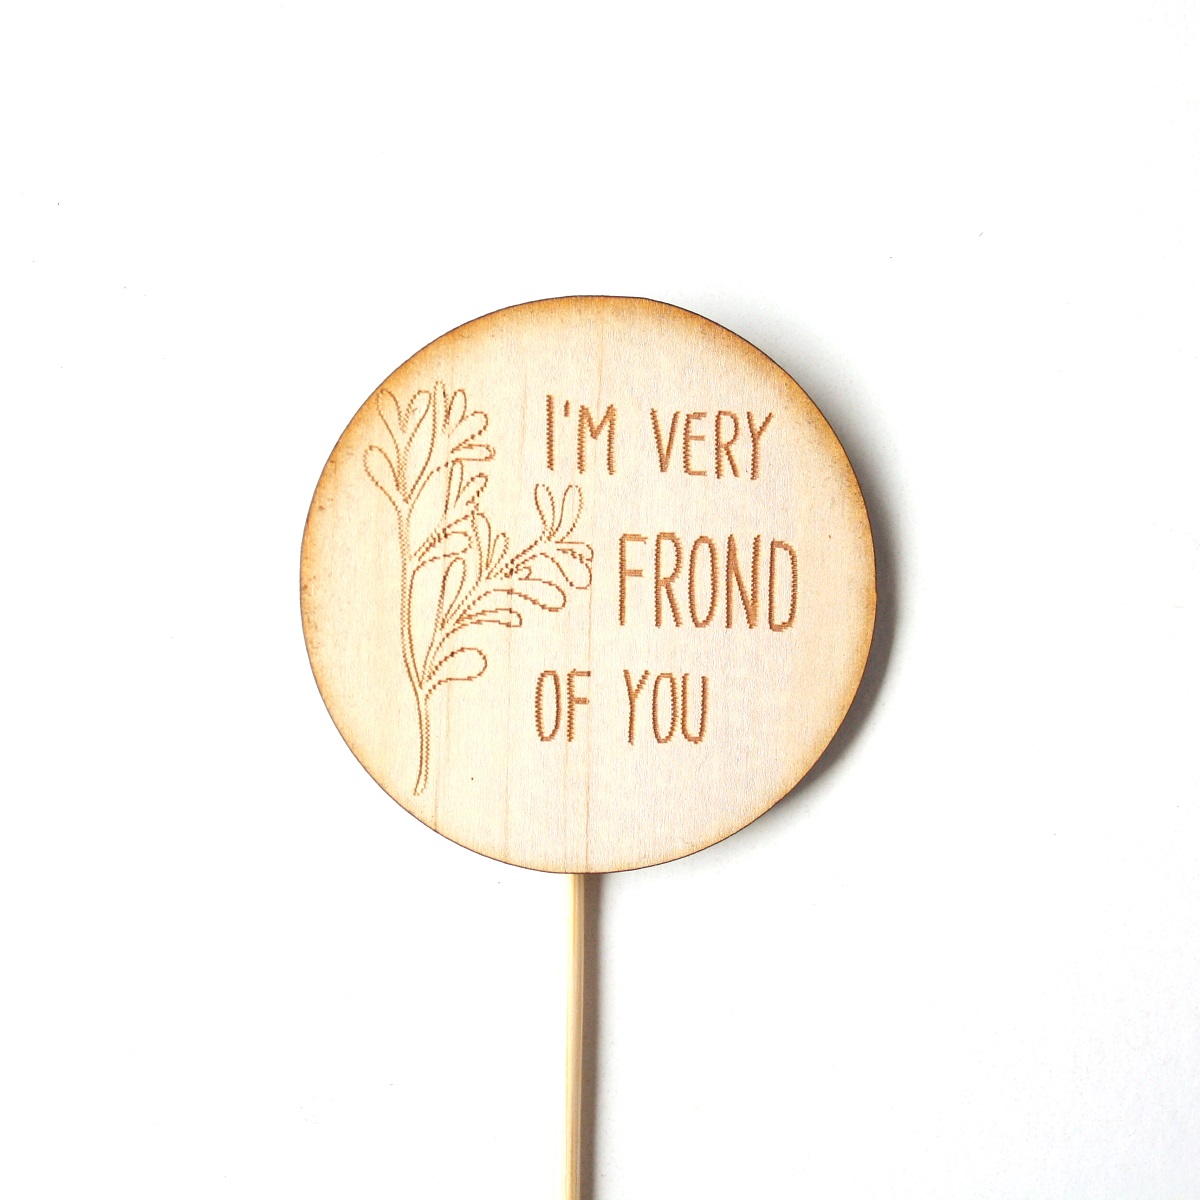 I'm very frond of you. Plant pun timber plant marker.